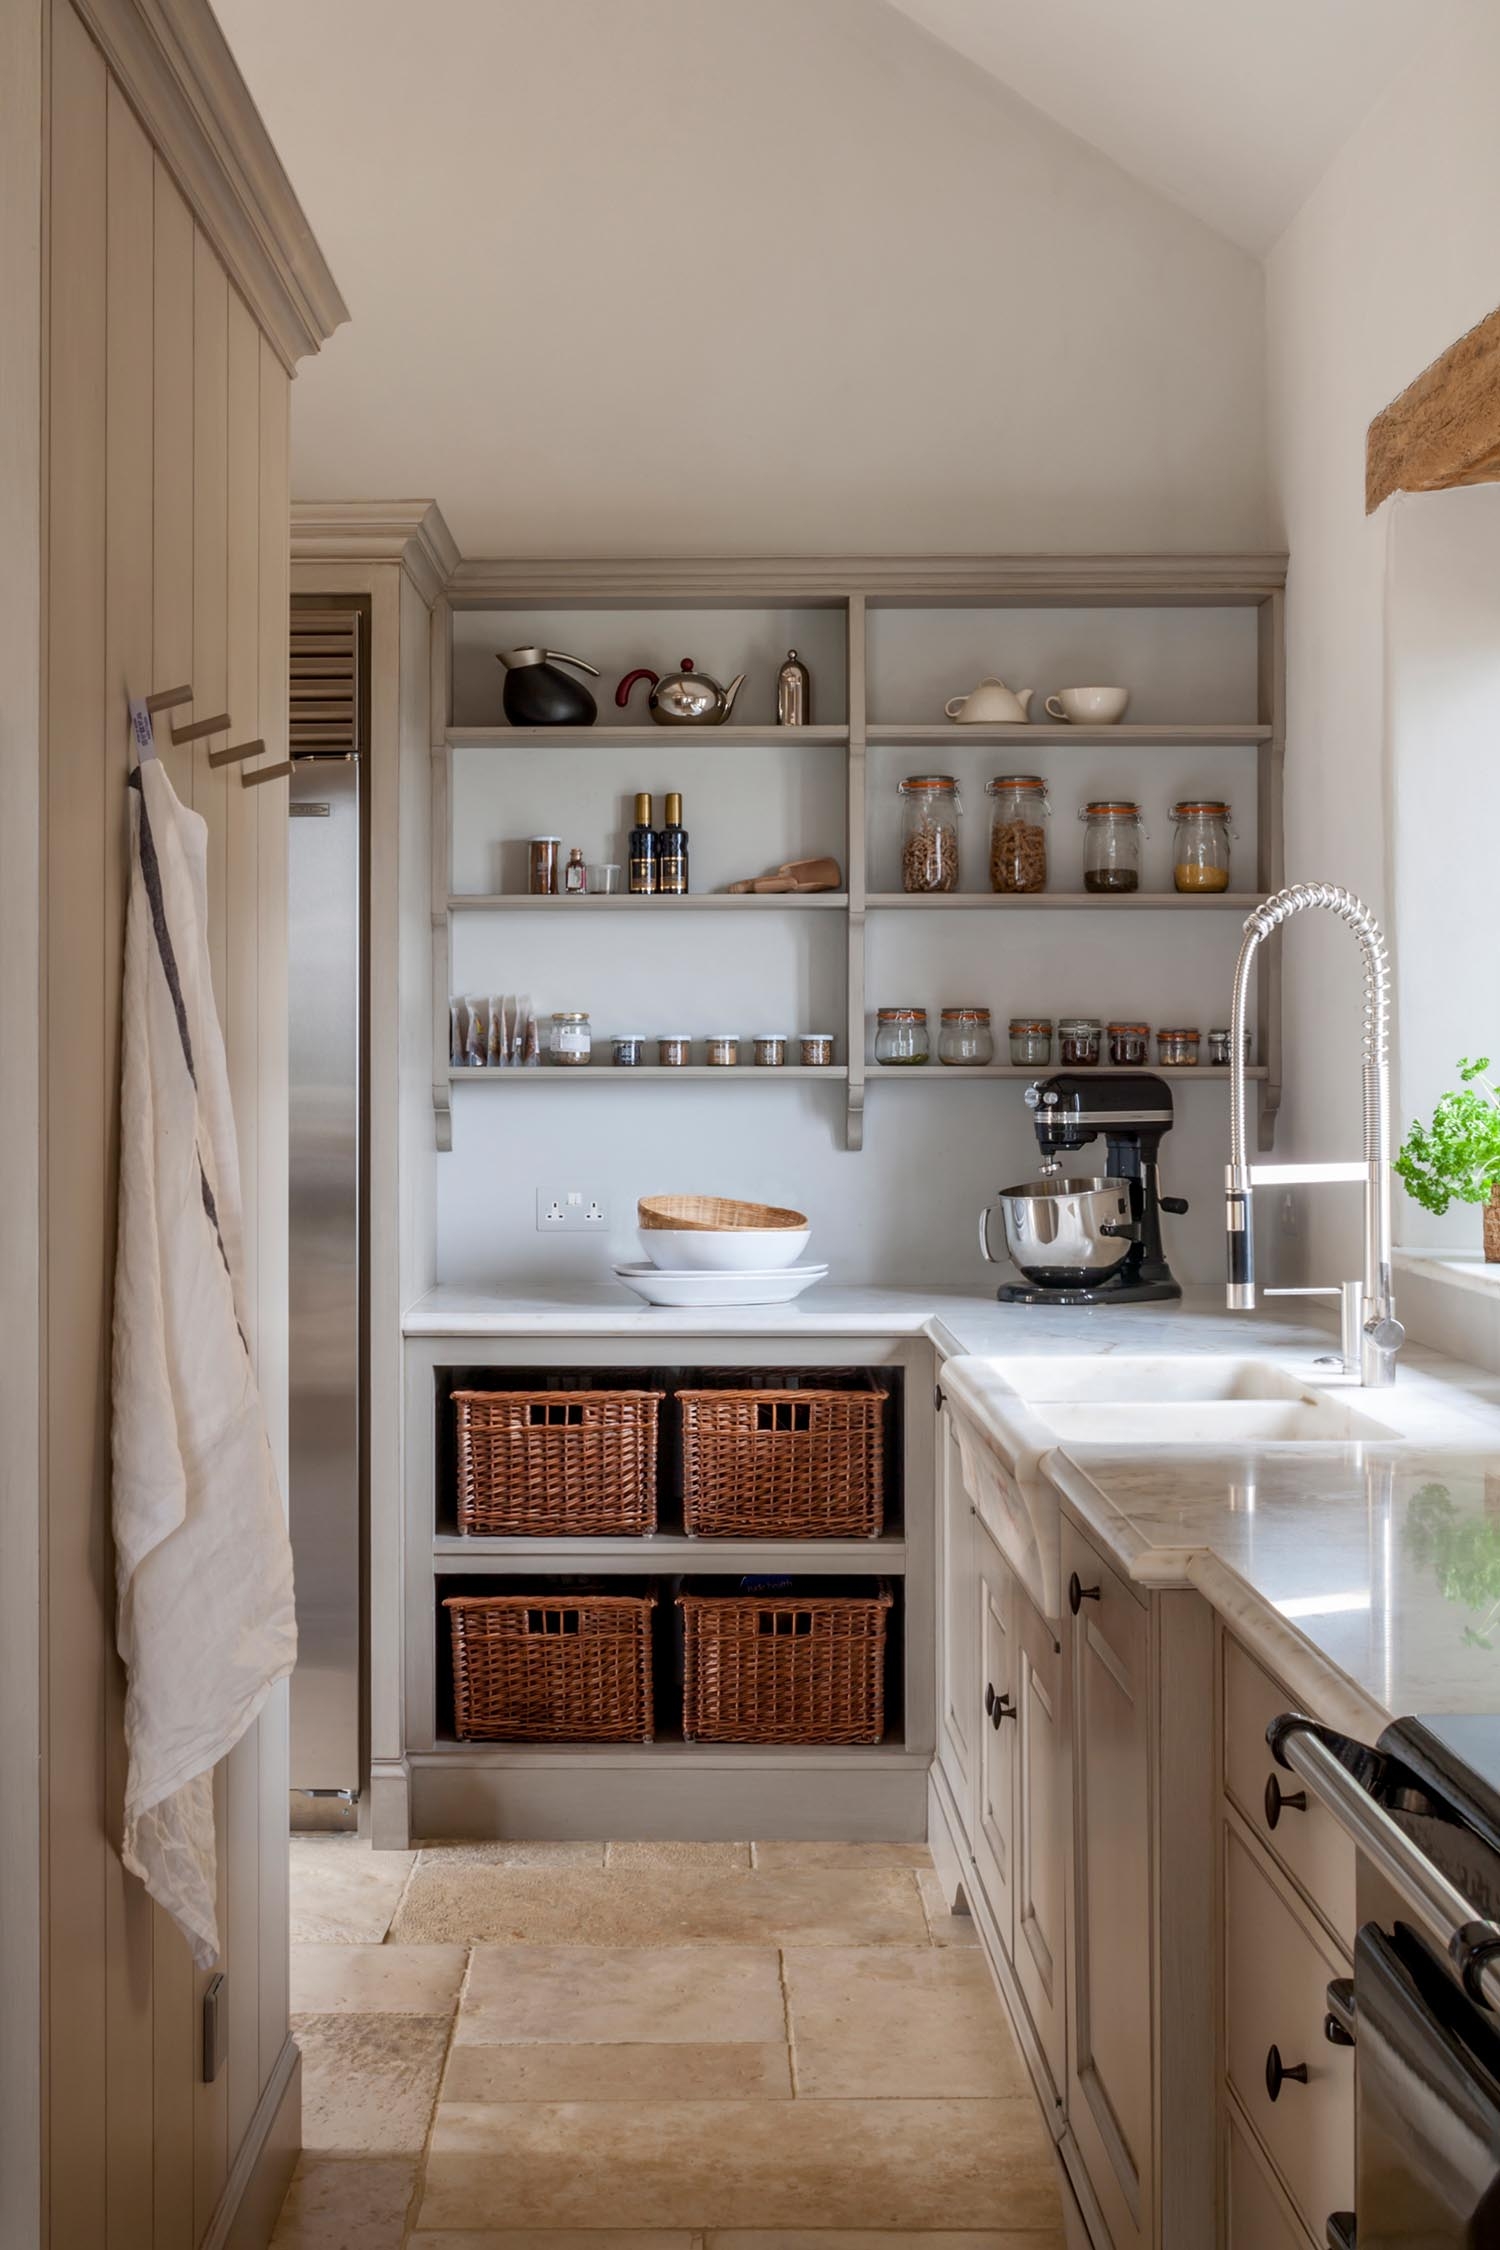 https://foter.com/photos/424/kitchen-with-pantry-style-open-shelving.jpg